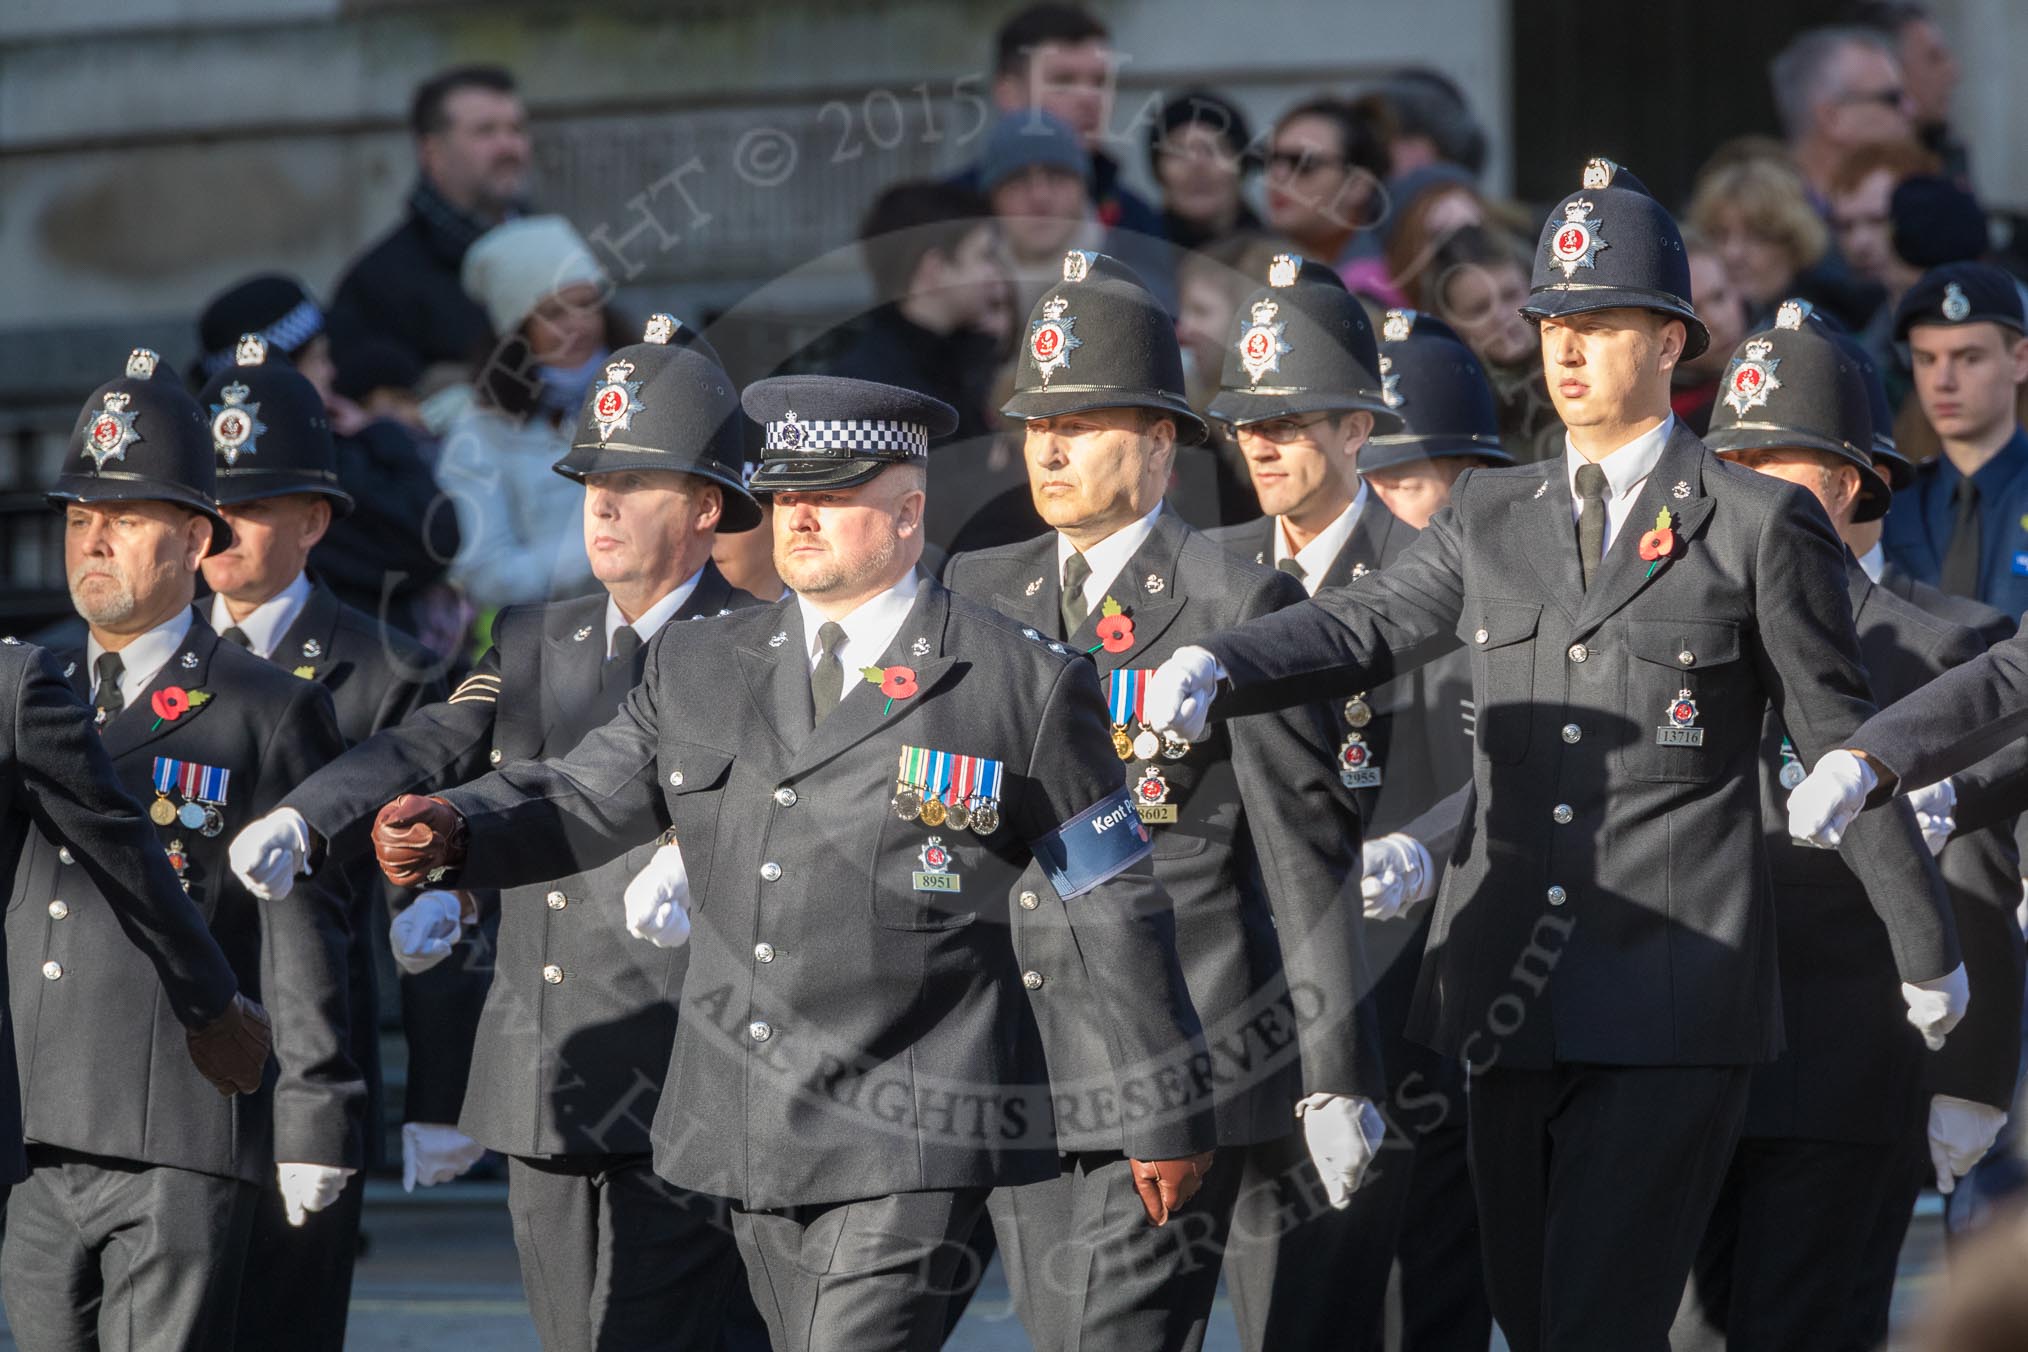 March Past, Remembrance Sunday at the Cenotaph 2016: M39 Kent Police.
Cenotaph, Whitehall, London SW1,
London,
Greater London,
United Kingdom,
on 13 November 2016 at 13:19, image #2930